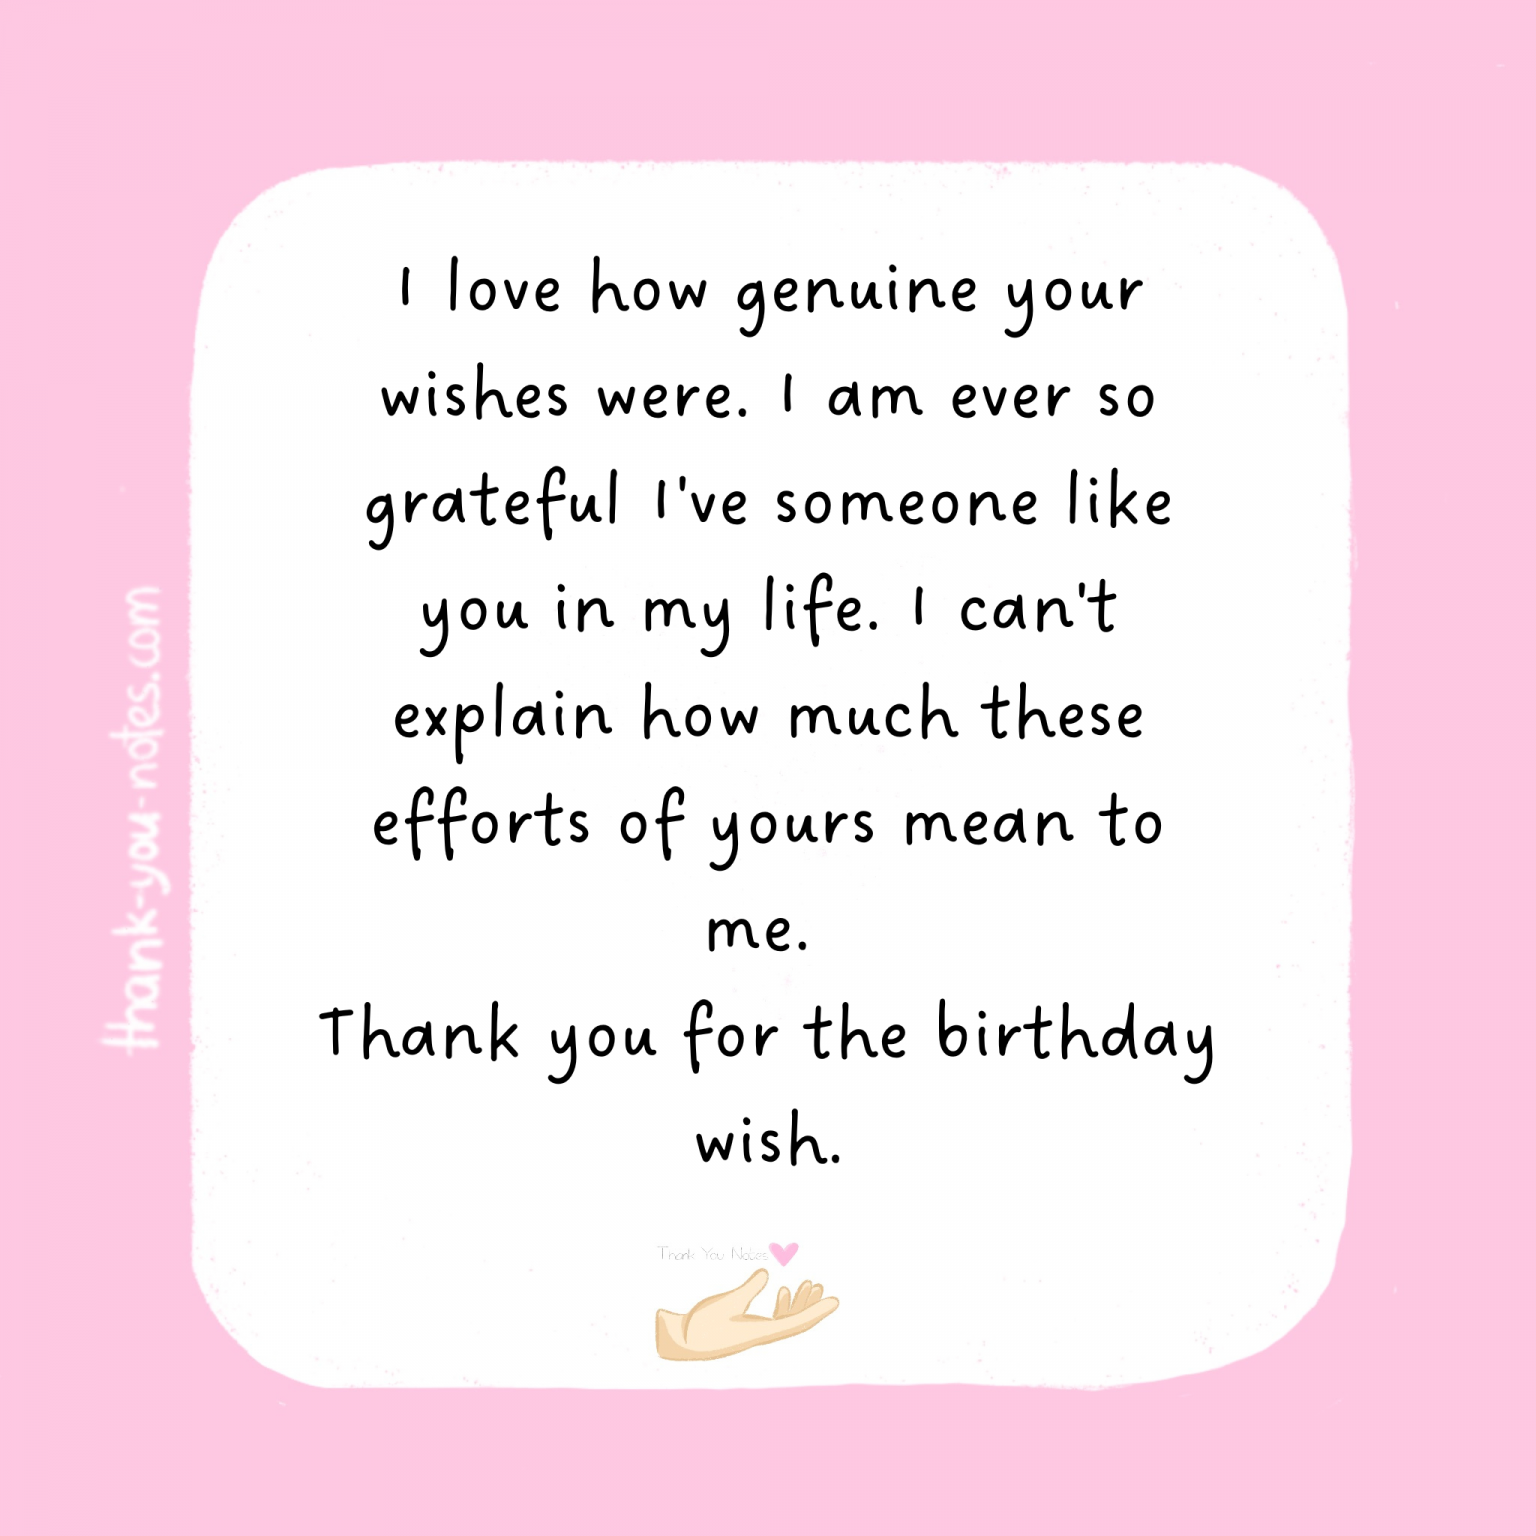 15+ Best 'Thank You For The Birthday Wish' Notes - The Thank You Notes Blog